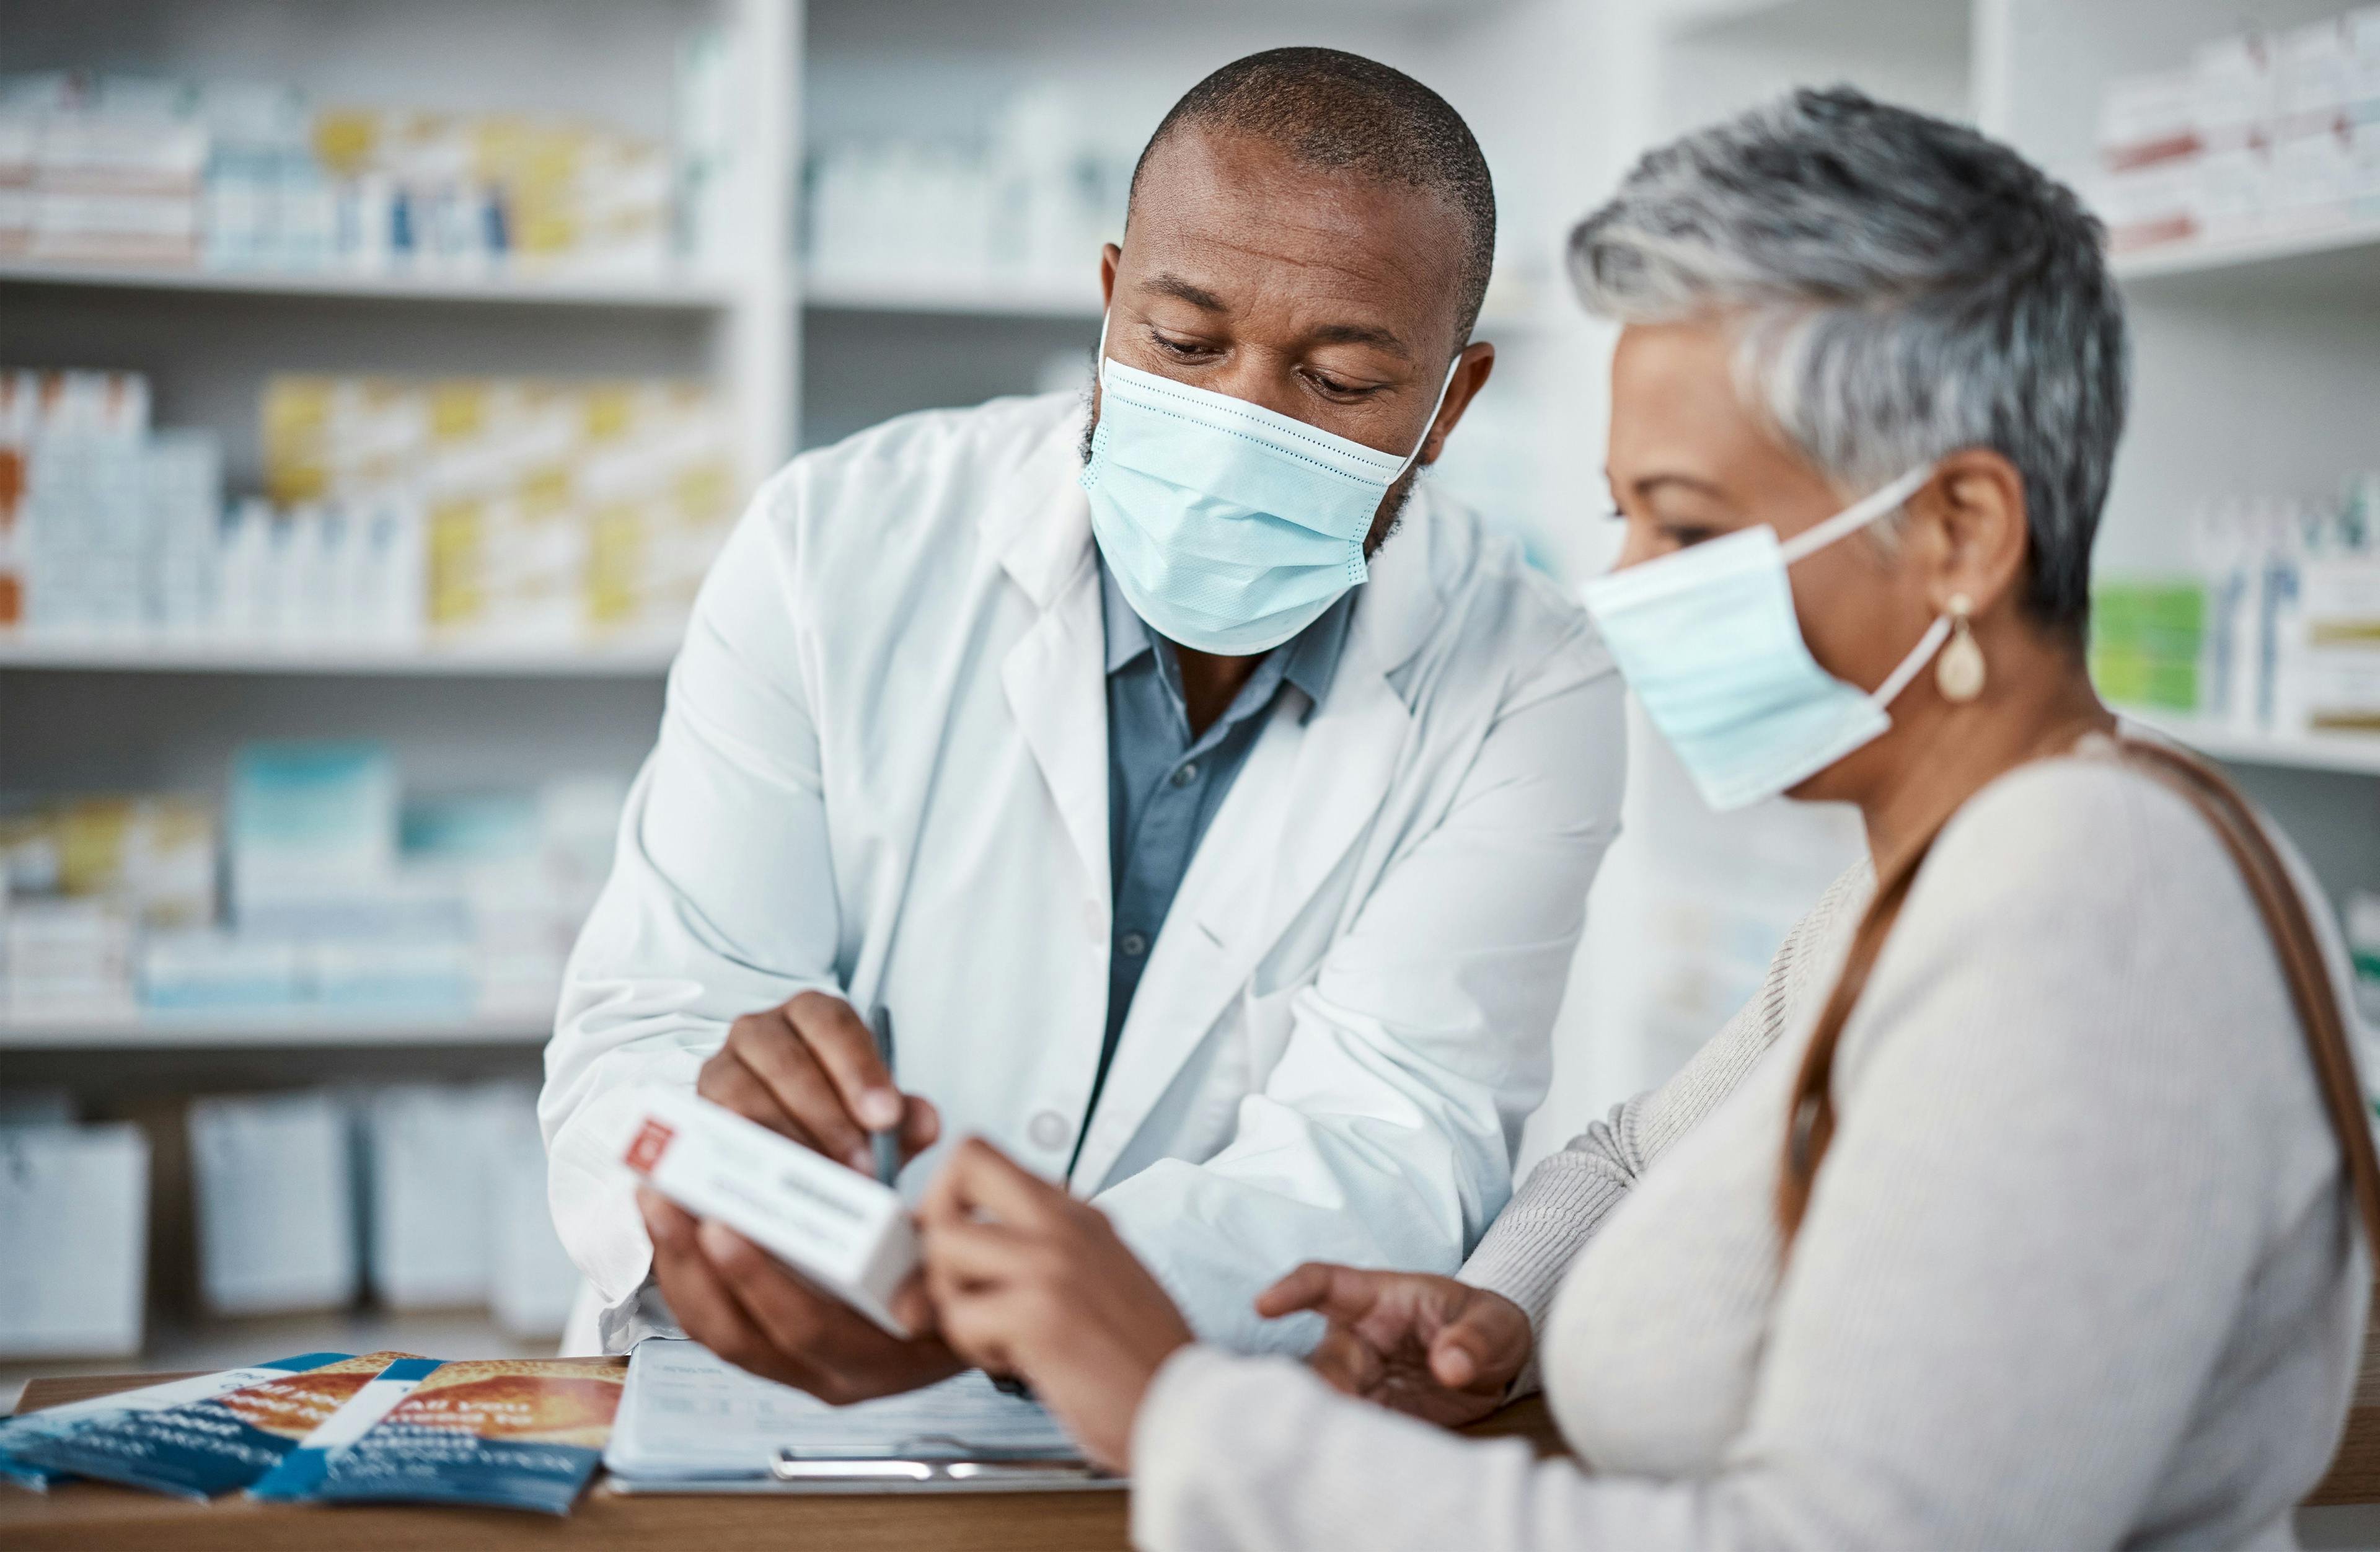 Pharmacist talking, helping or giving medical advice | Image Credit: C Daniels/peopleimages.com - stock.adobe.com